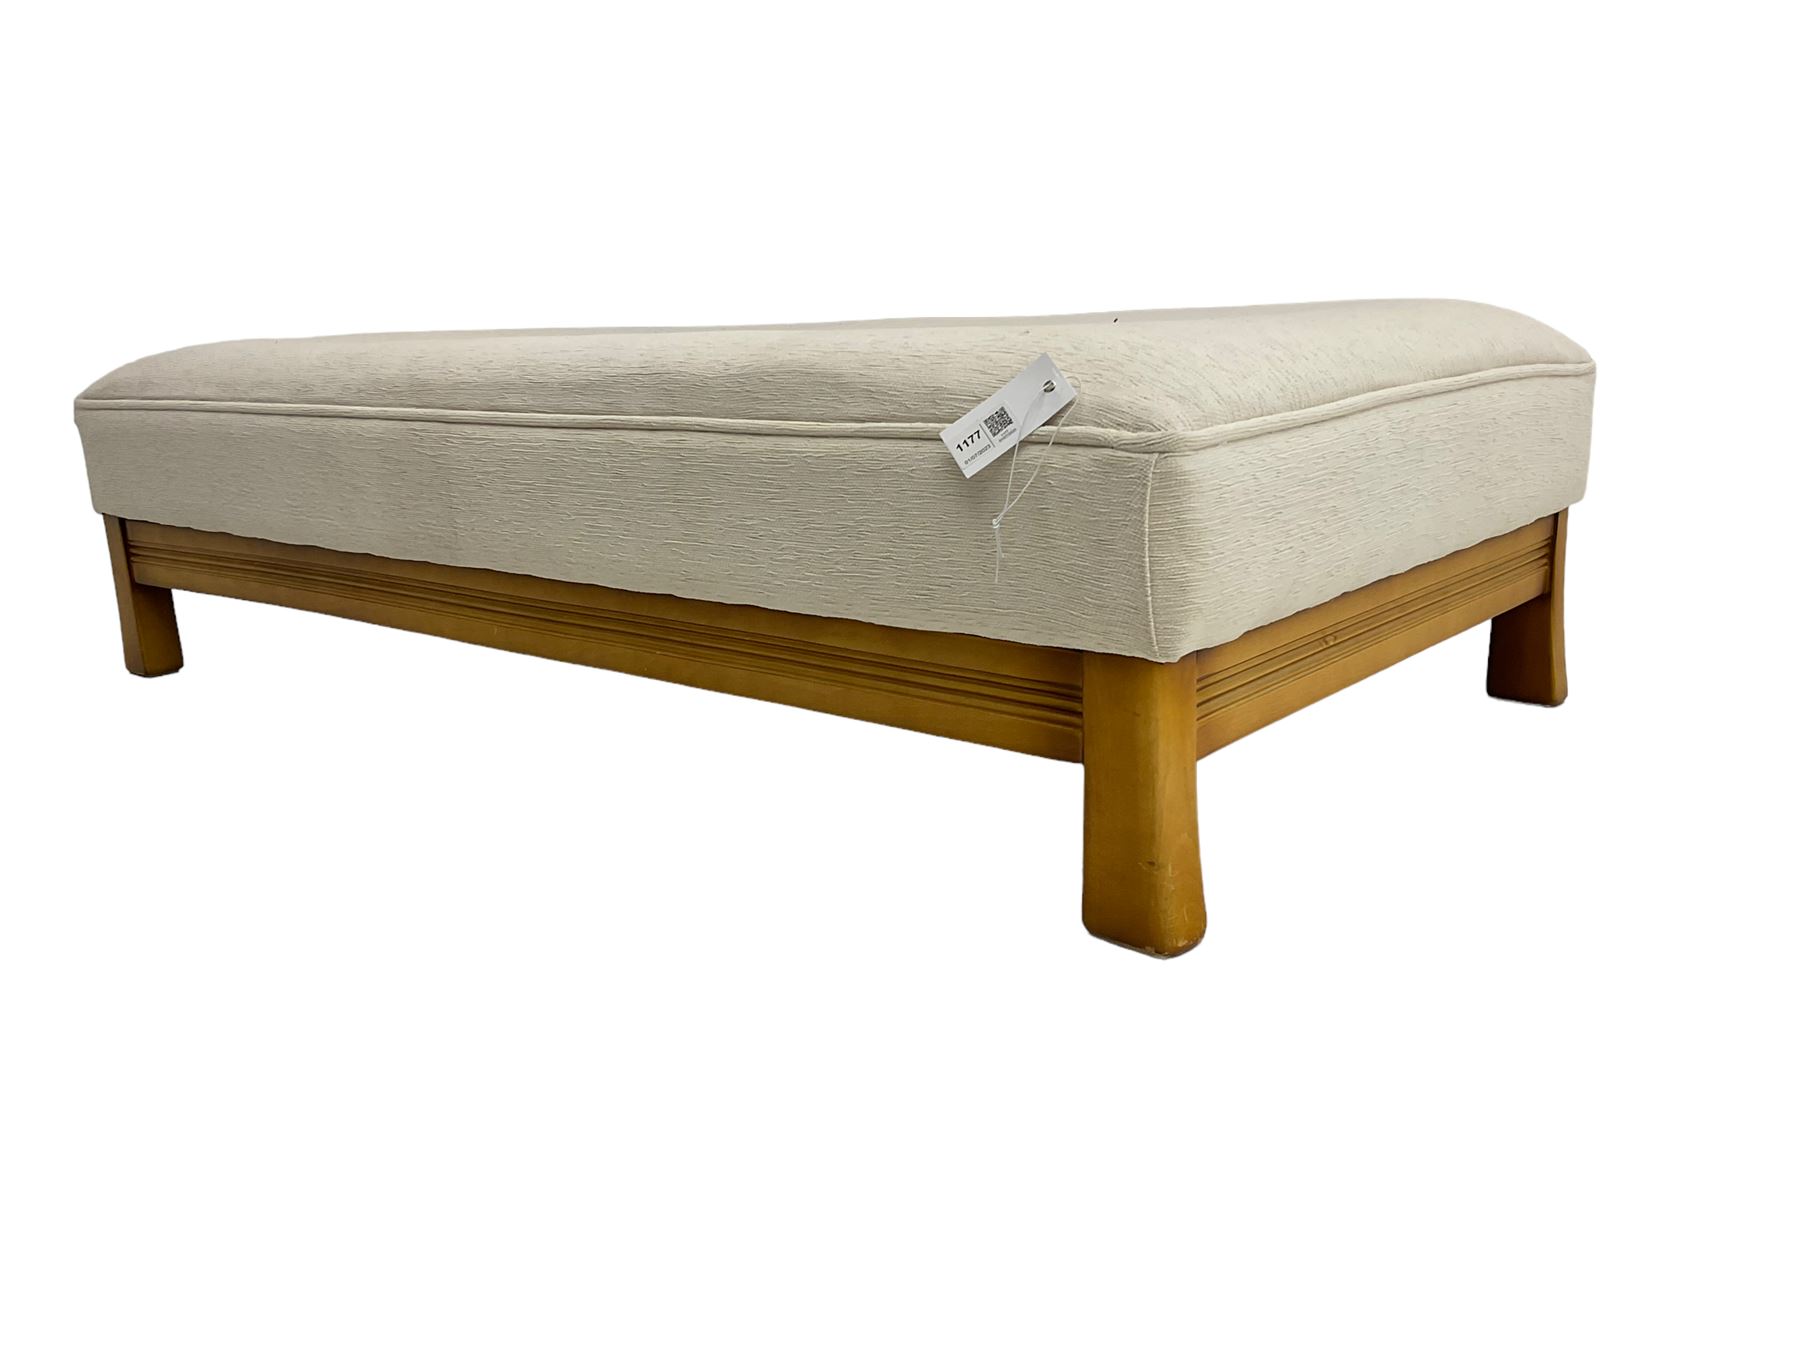 Large rectangular stained beech footstool upholstered in cream fabric - Image 4 of 6